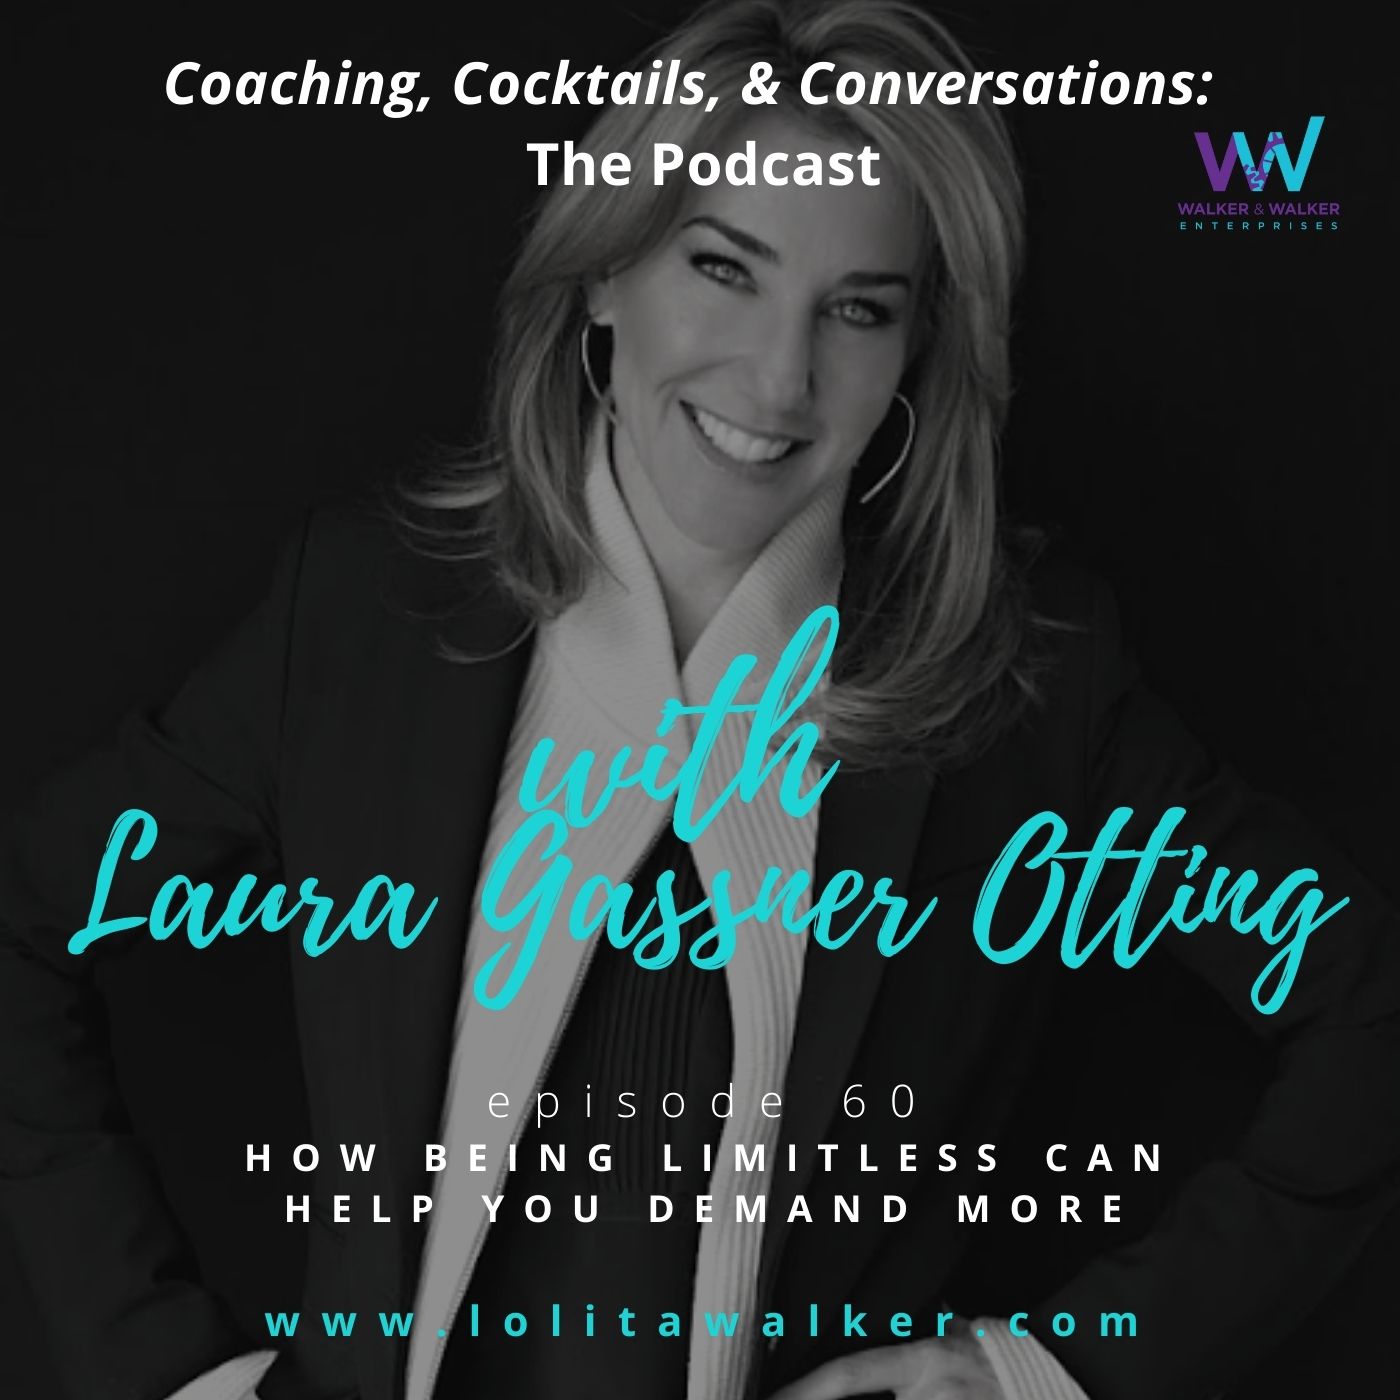 S3E60 - How Being Limitless Can Help You Demand More (with Laura Gassner Otting)